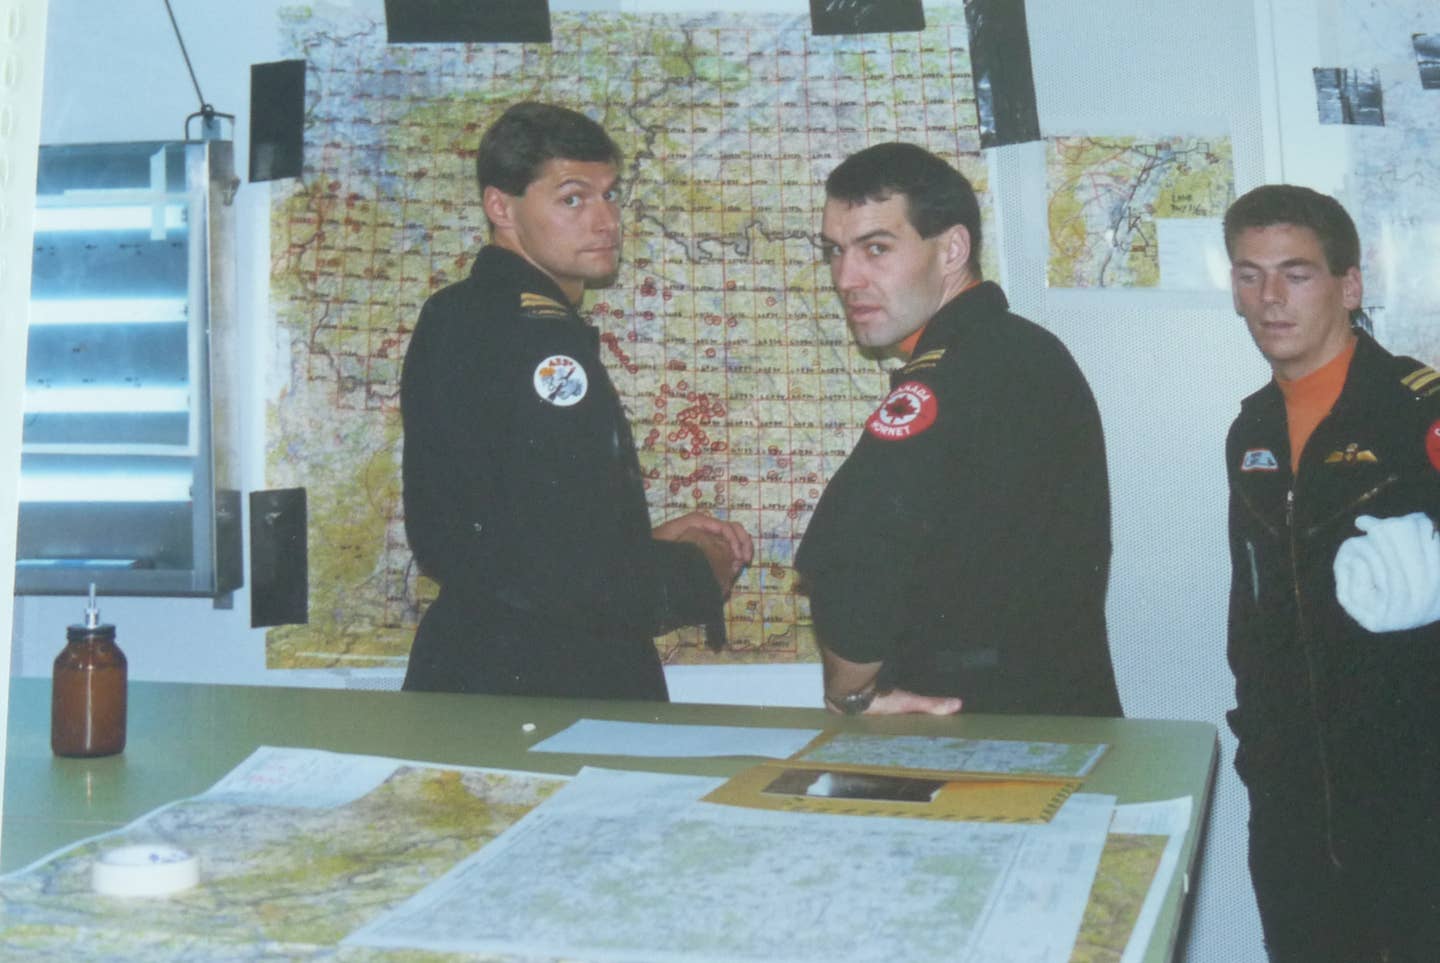 Pilots from 433 Squadron in their deployed bunker, Lahr, West Germany. Today's mission lead, Dog, has a towel under his arm. The planning map behind the two other pilots clearly shows the inter-German border. <em>Dan McWilliams</em>